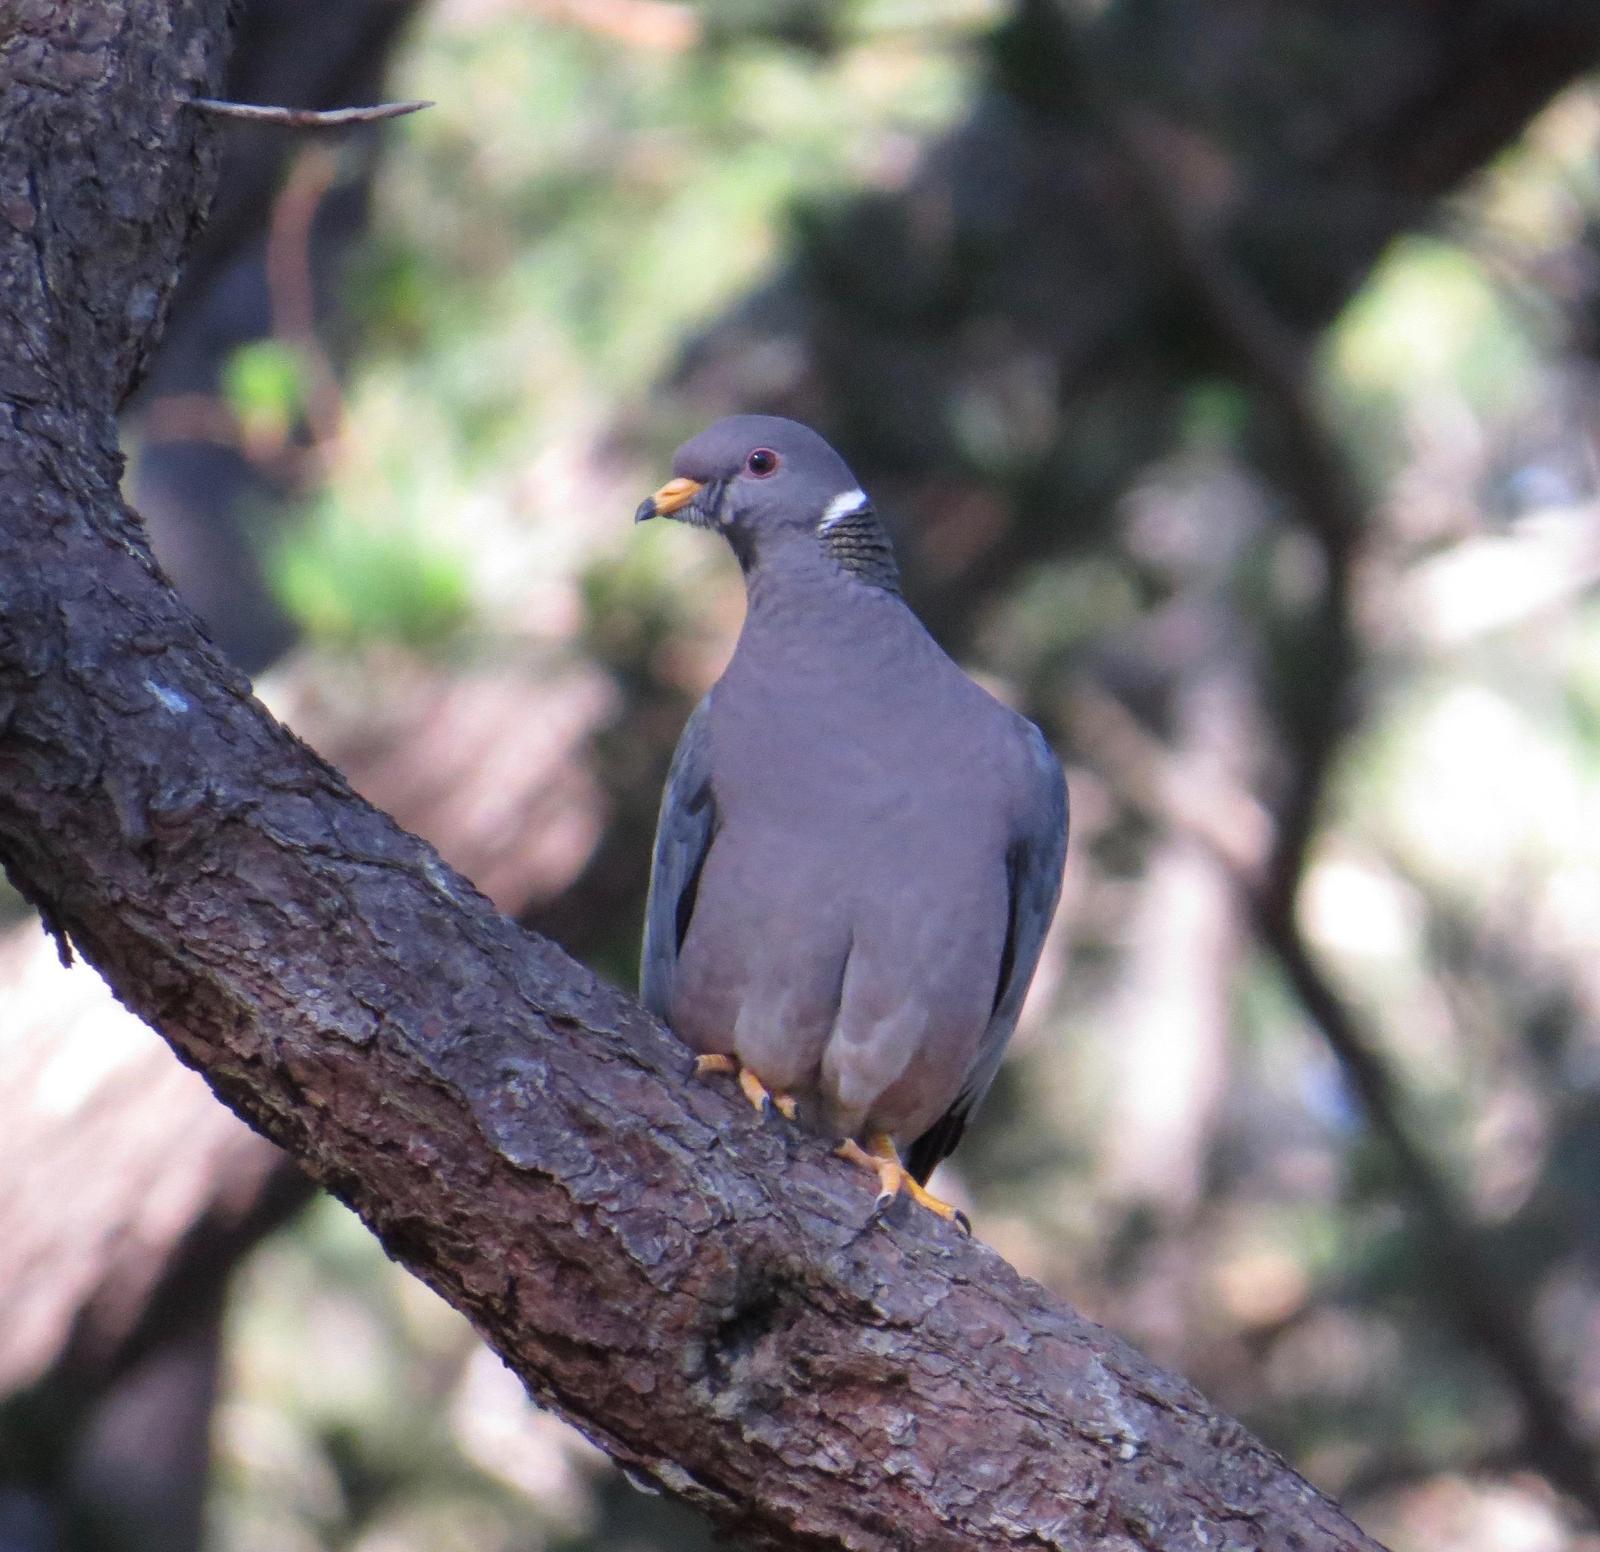 Band-tailed Pigeon Photo by Don Glasco